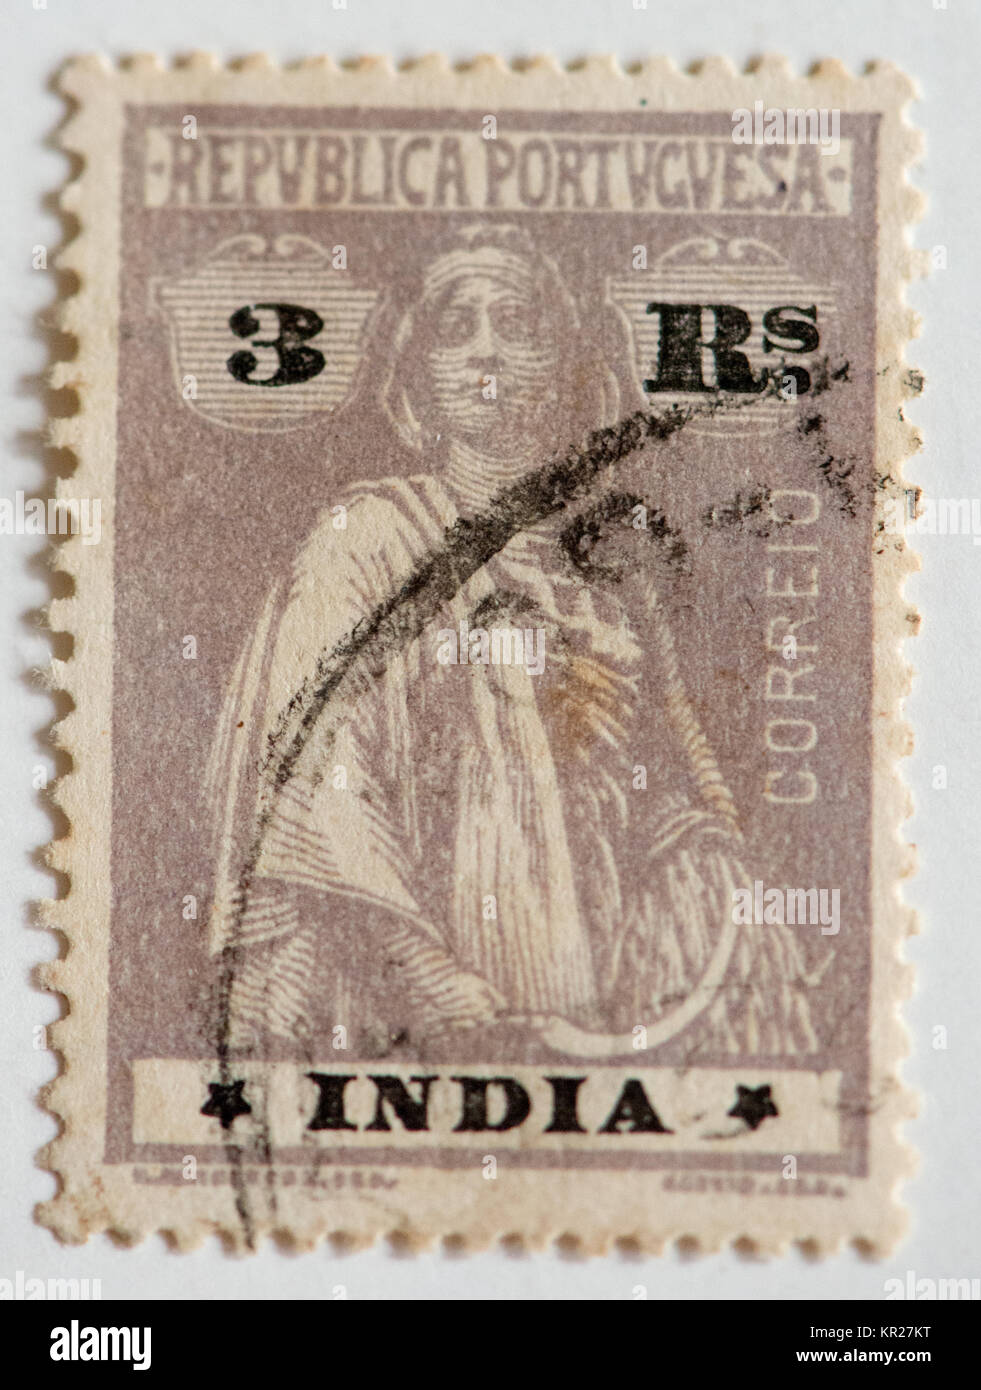 stamp from portugal with India overprint Stock Photo